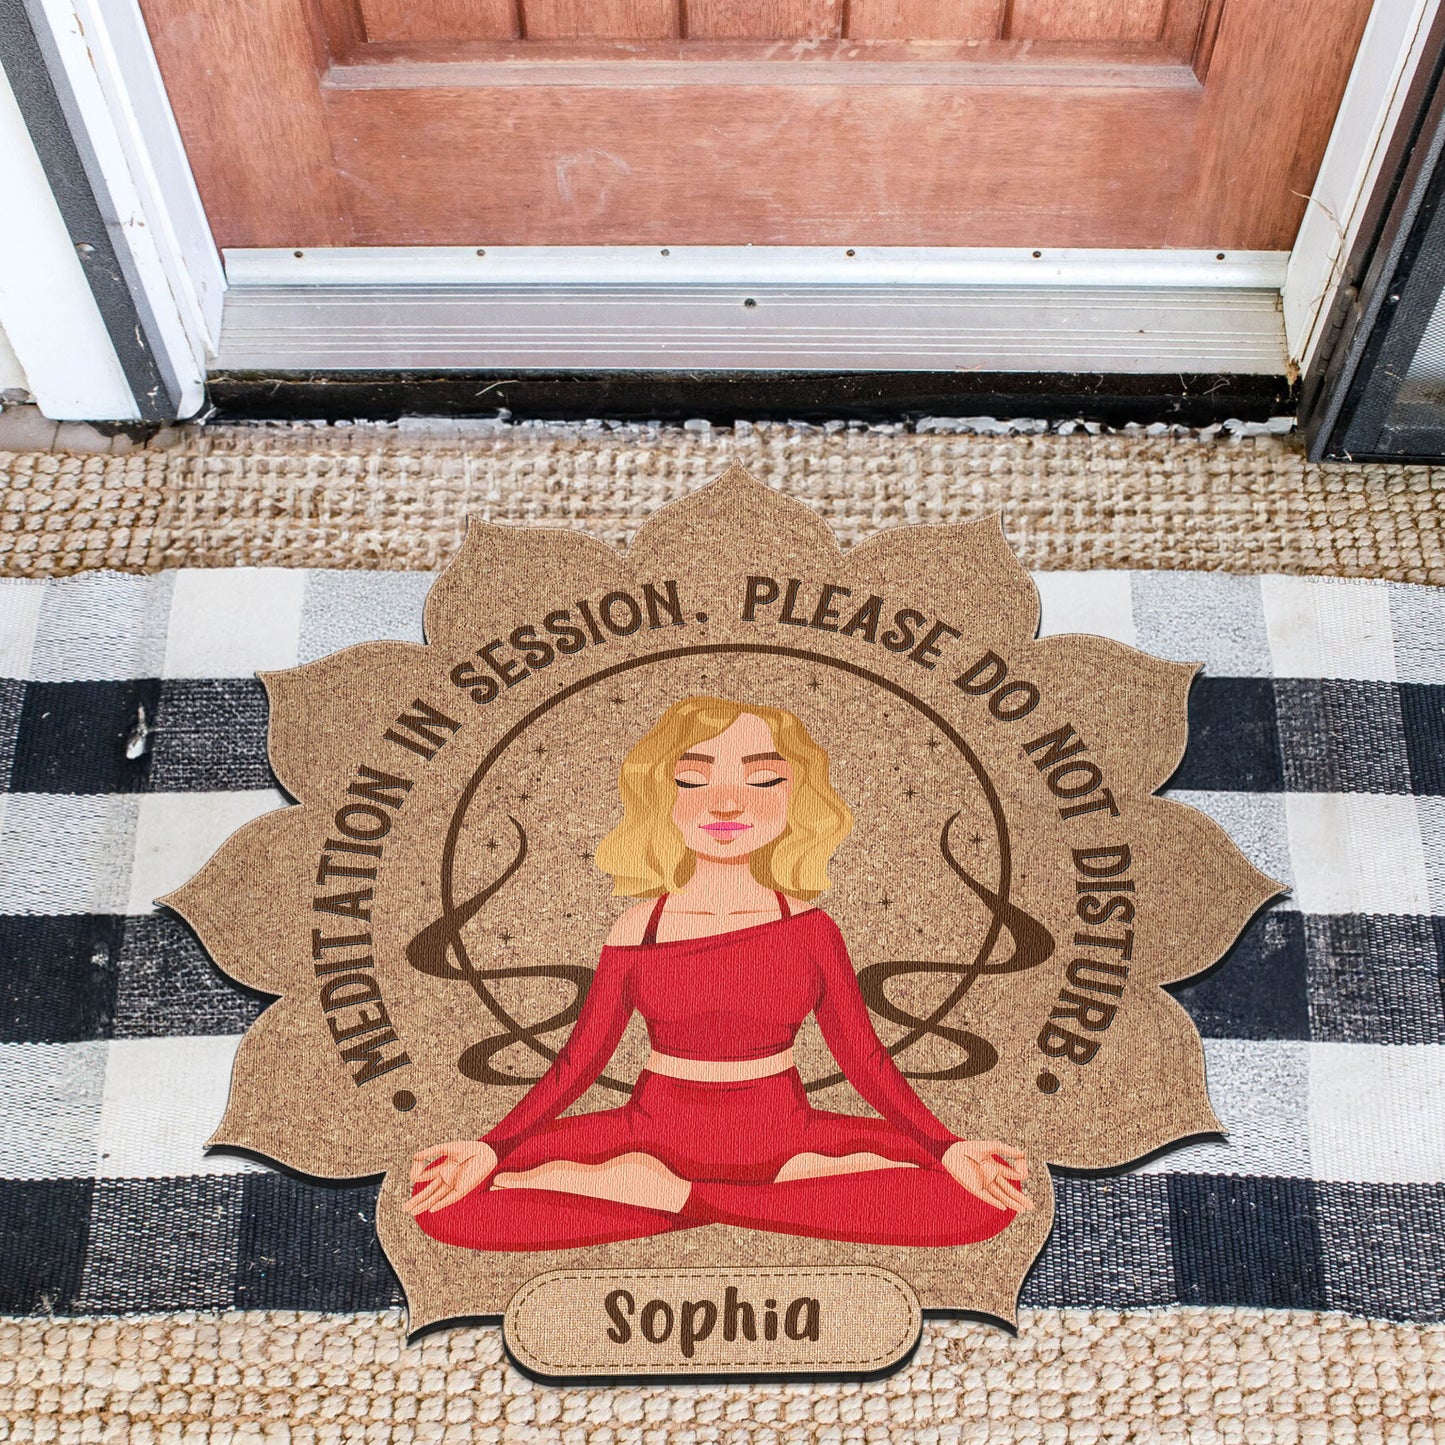 Meditation In Session. Please Do Not Disturb - Personalized Custom Shaped Doormat